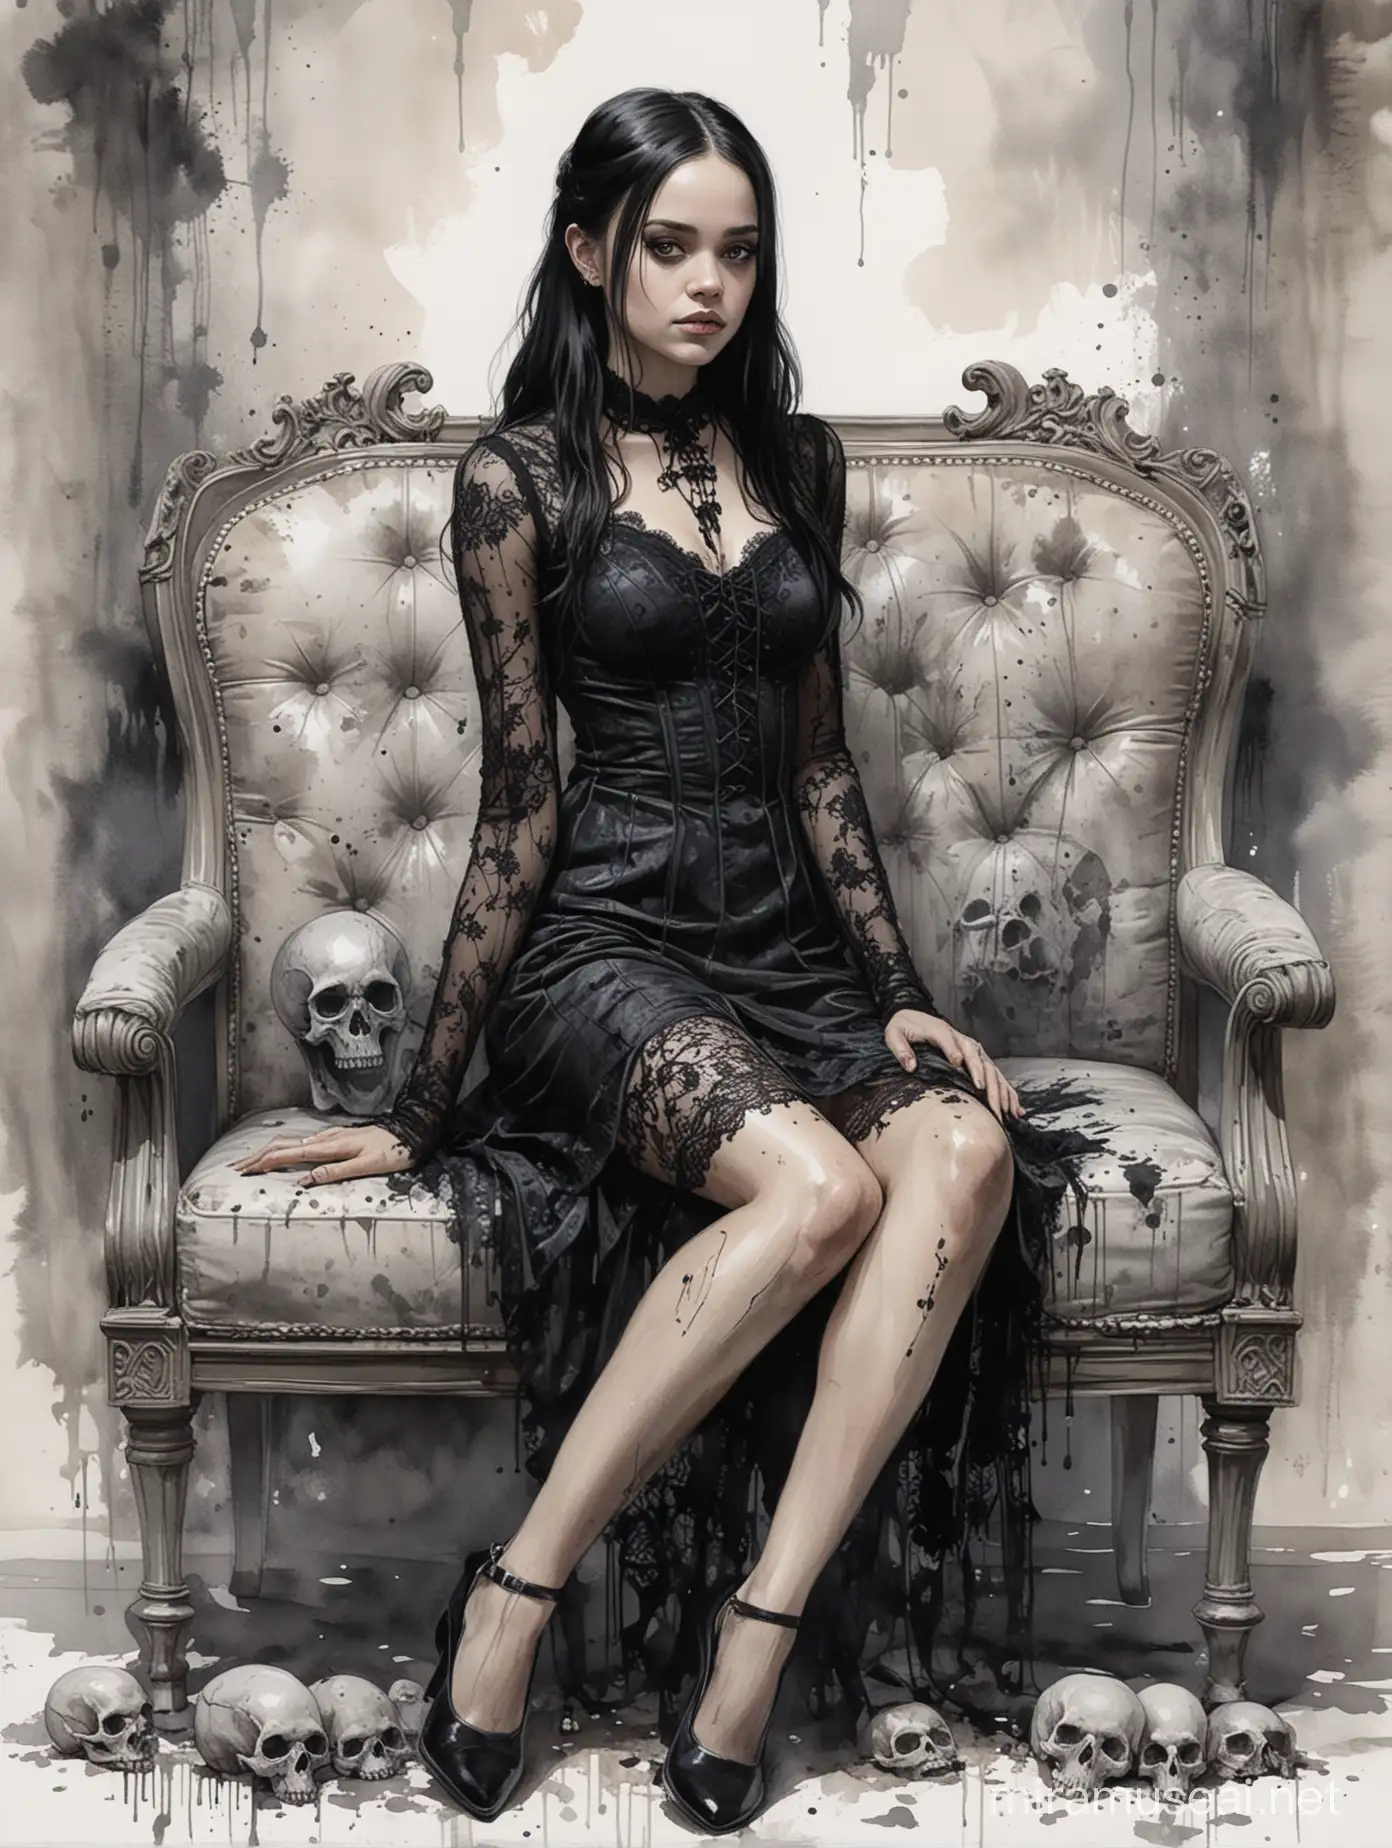 Alex Maleev illustration depicting sultry Jenna Ortega as Wednesday Addams wearing gothic lace dress, sitting on a rotting couch with skulls, white background, messy watercolor, very delicate and thin lines, no distortion, gray palette, insanely high detail, very high quality
